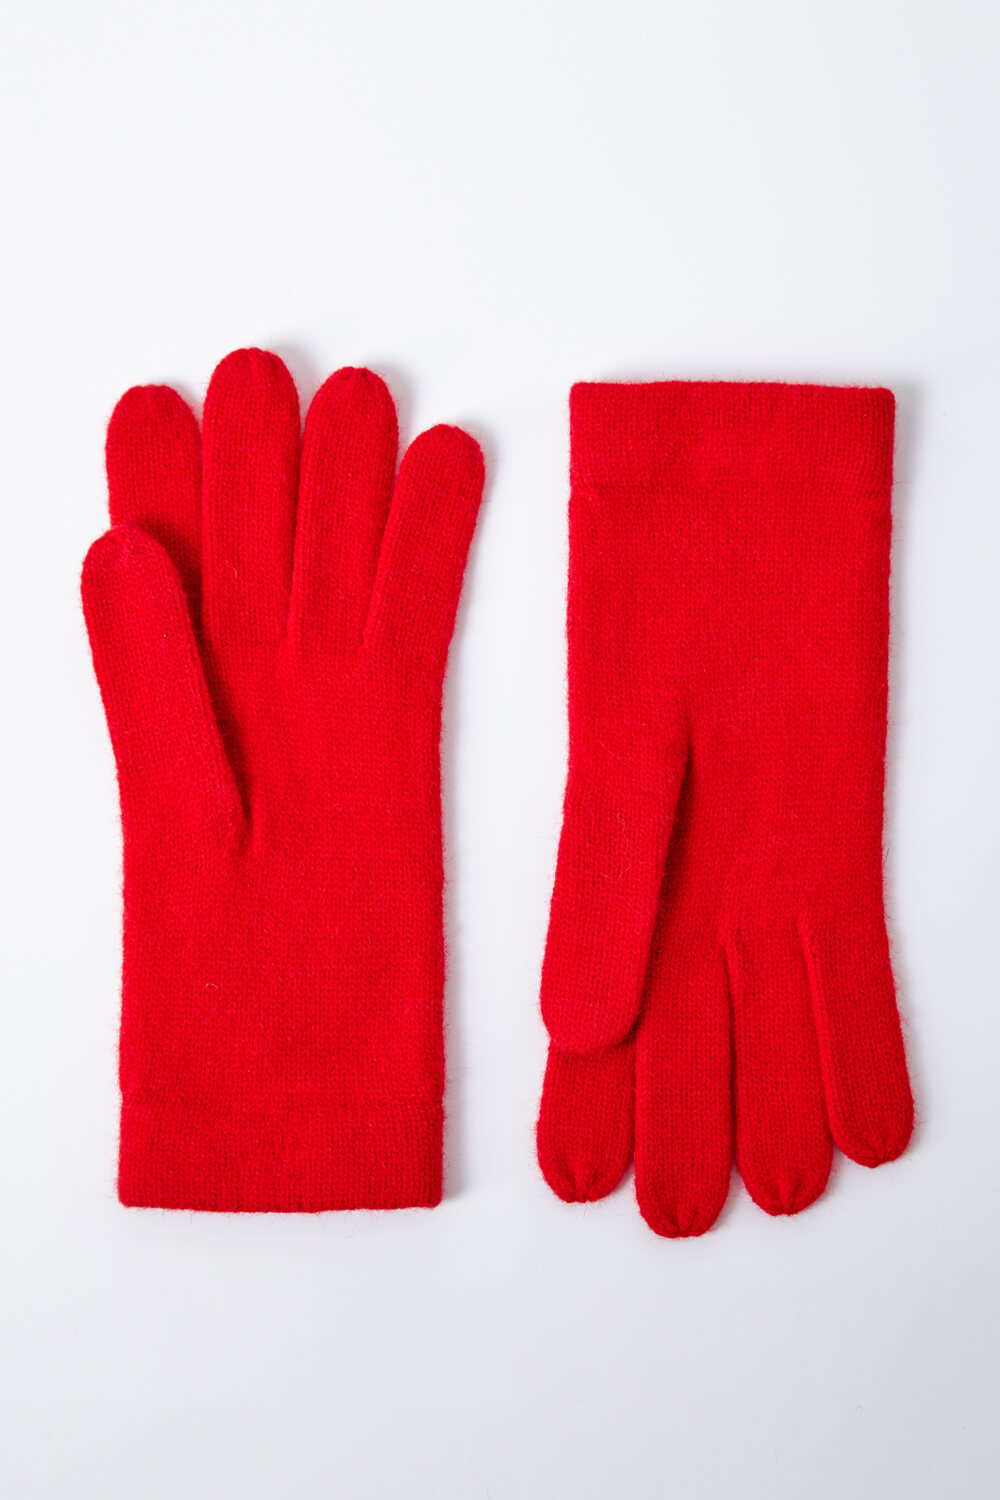 Red One Size Stretch Knit Gloves, Image 5 of 5